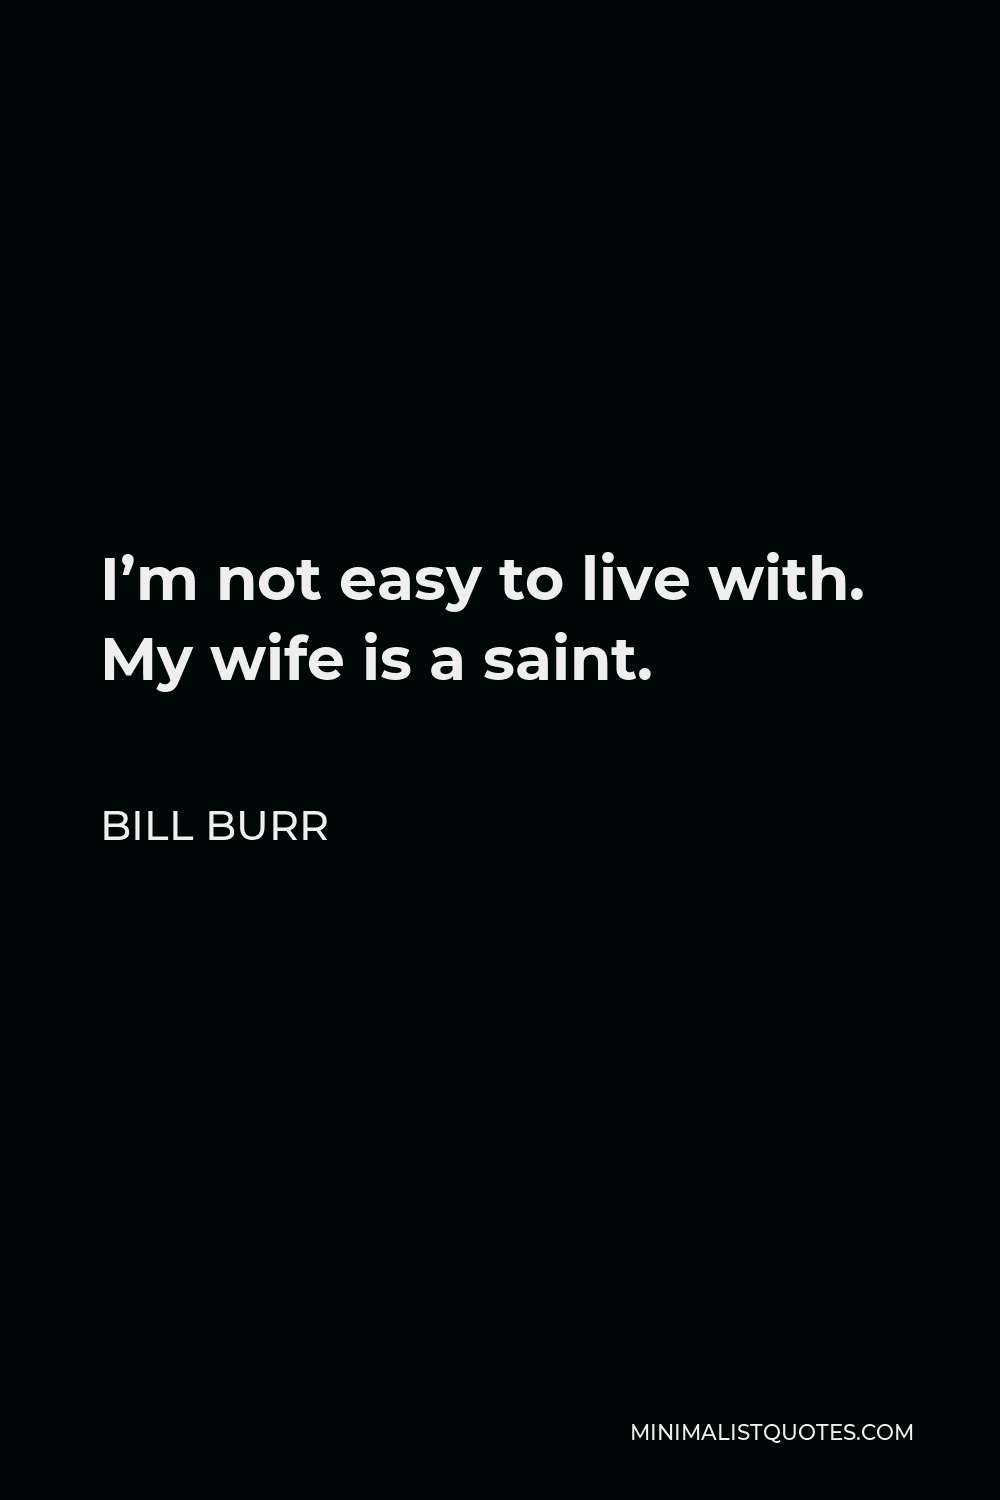 Bill Burr Quote - I’m not easy to live with. My wife is a saint.